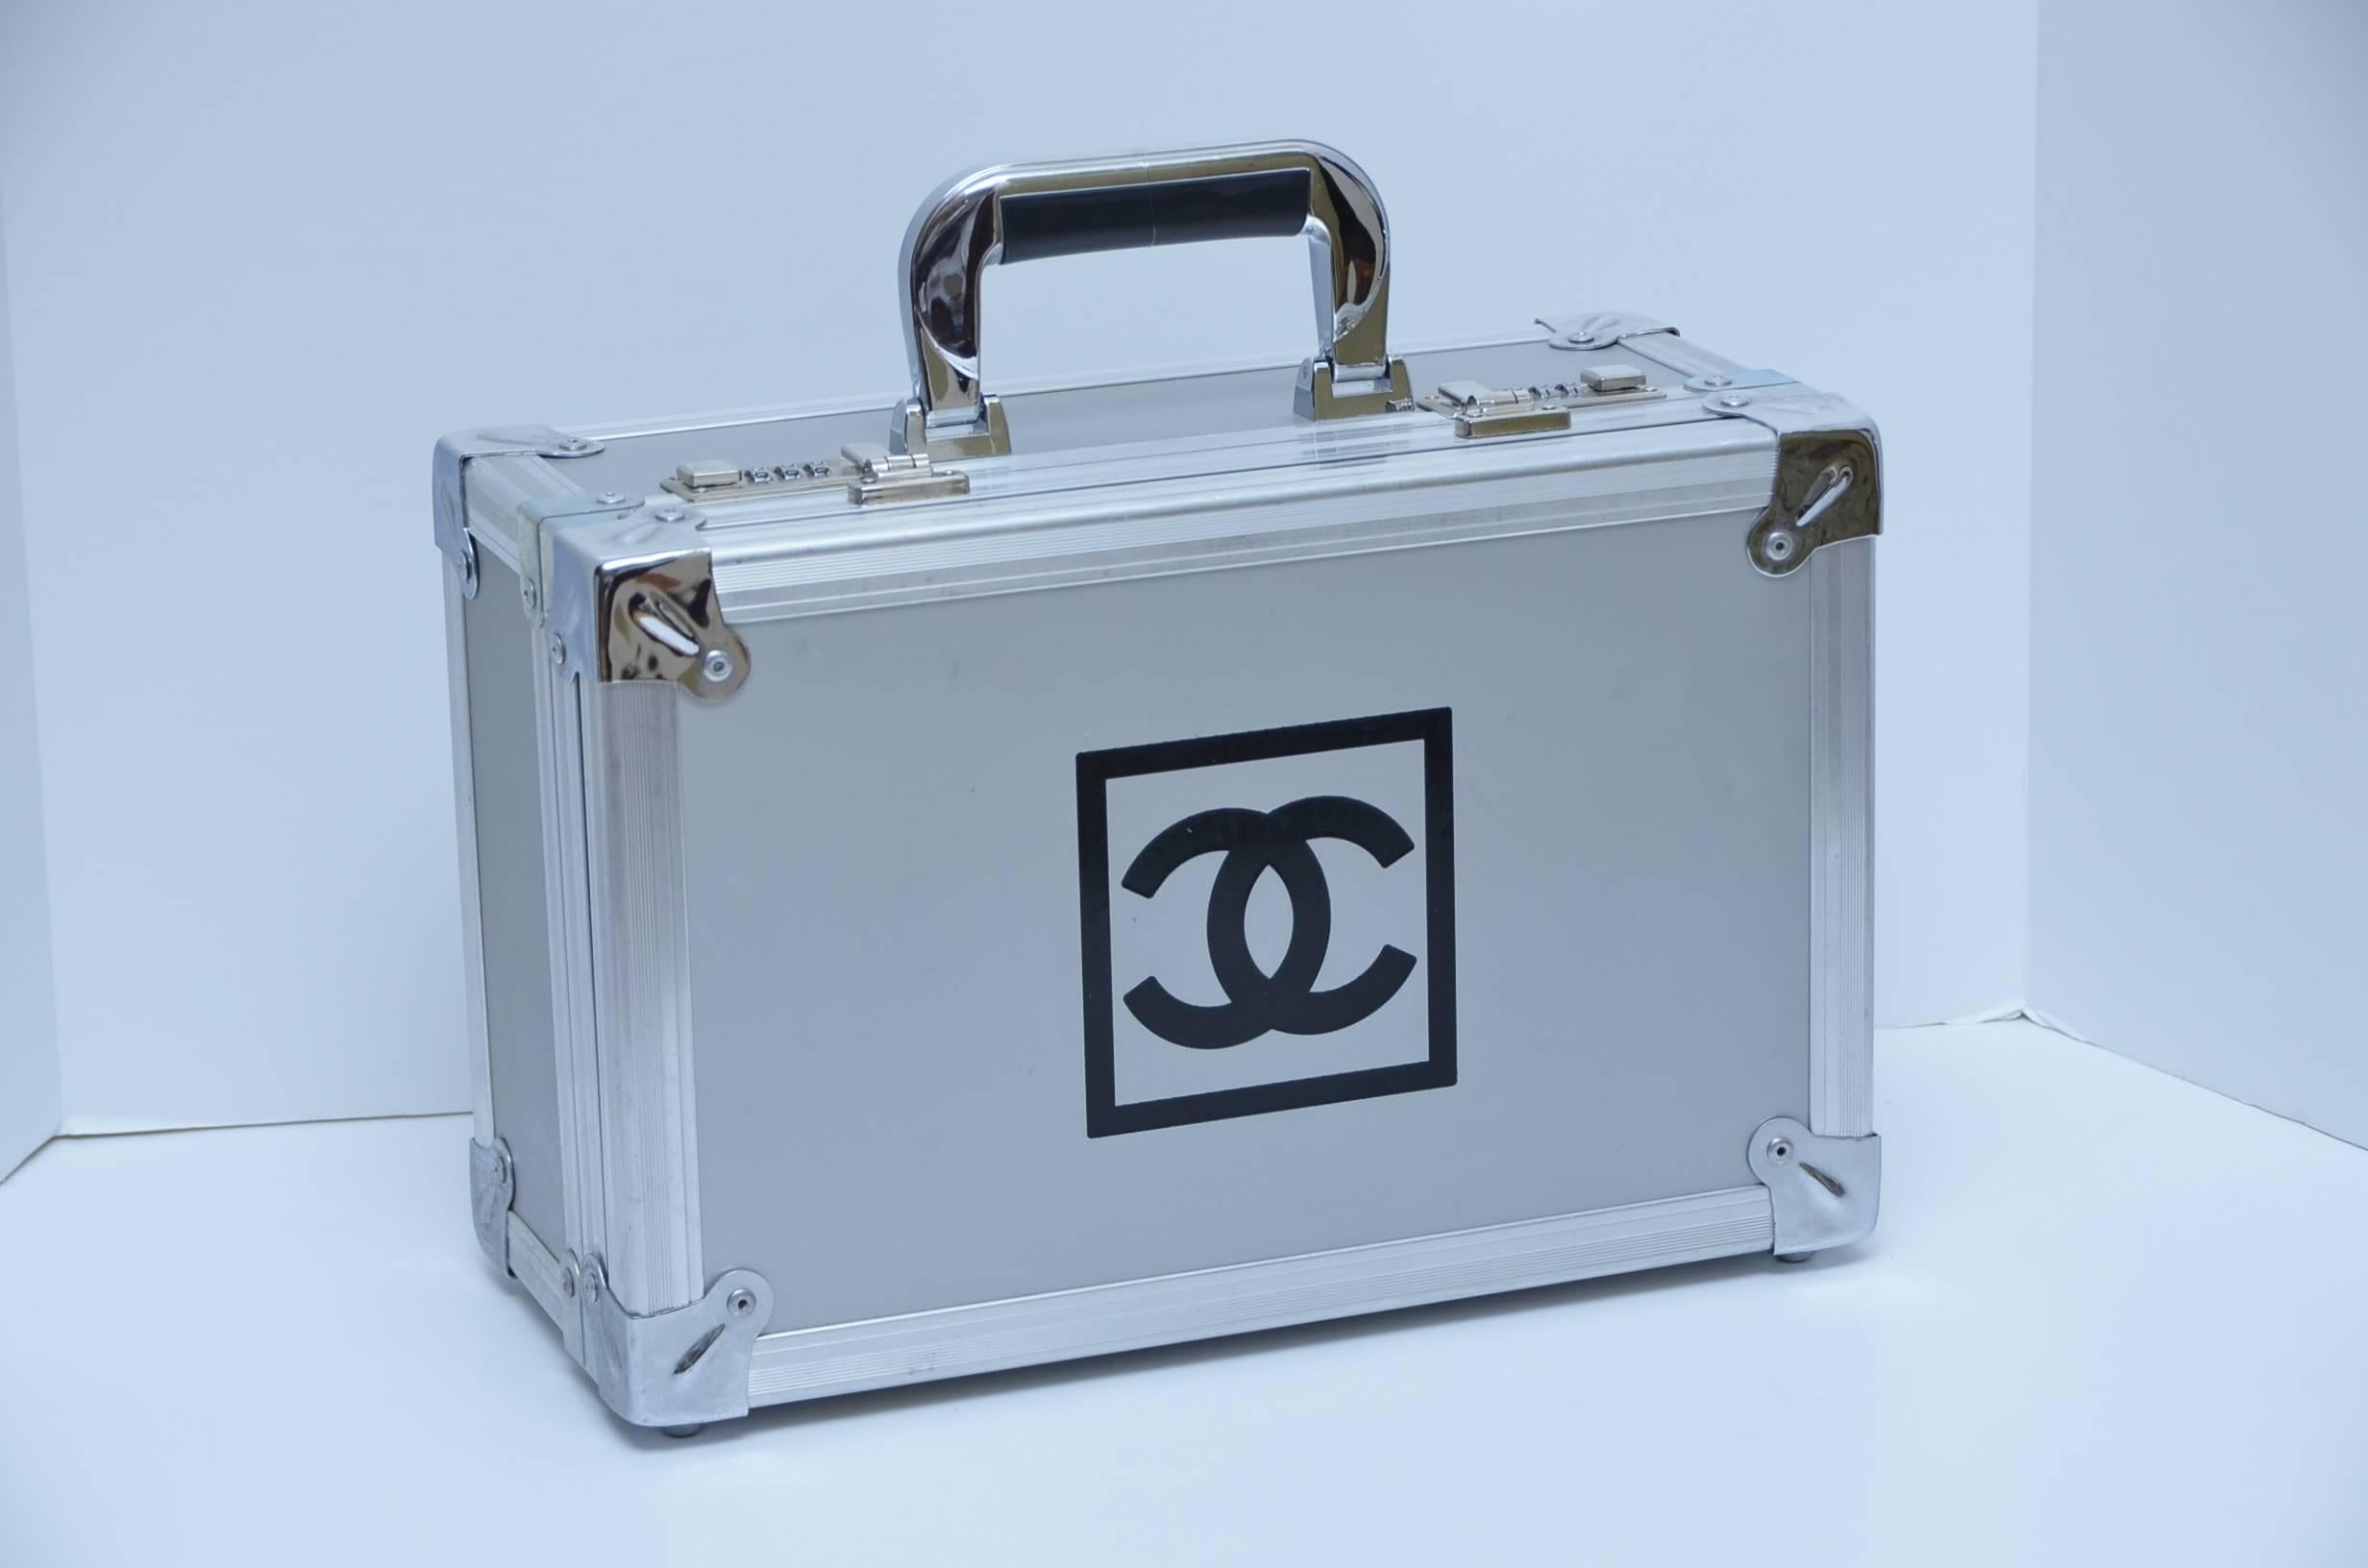 Chanel has created a stylish metal bocce ball  Pétanque set. 
The Italian  bocce ball set includes six stainless steel balls engraved with Chanel and a wooden jack, which is the target in the game.
Silver tone metal box with 3  zero  digit combo